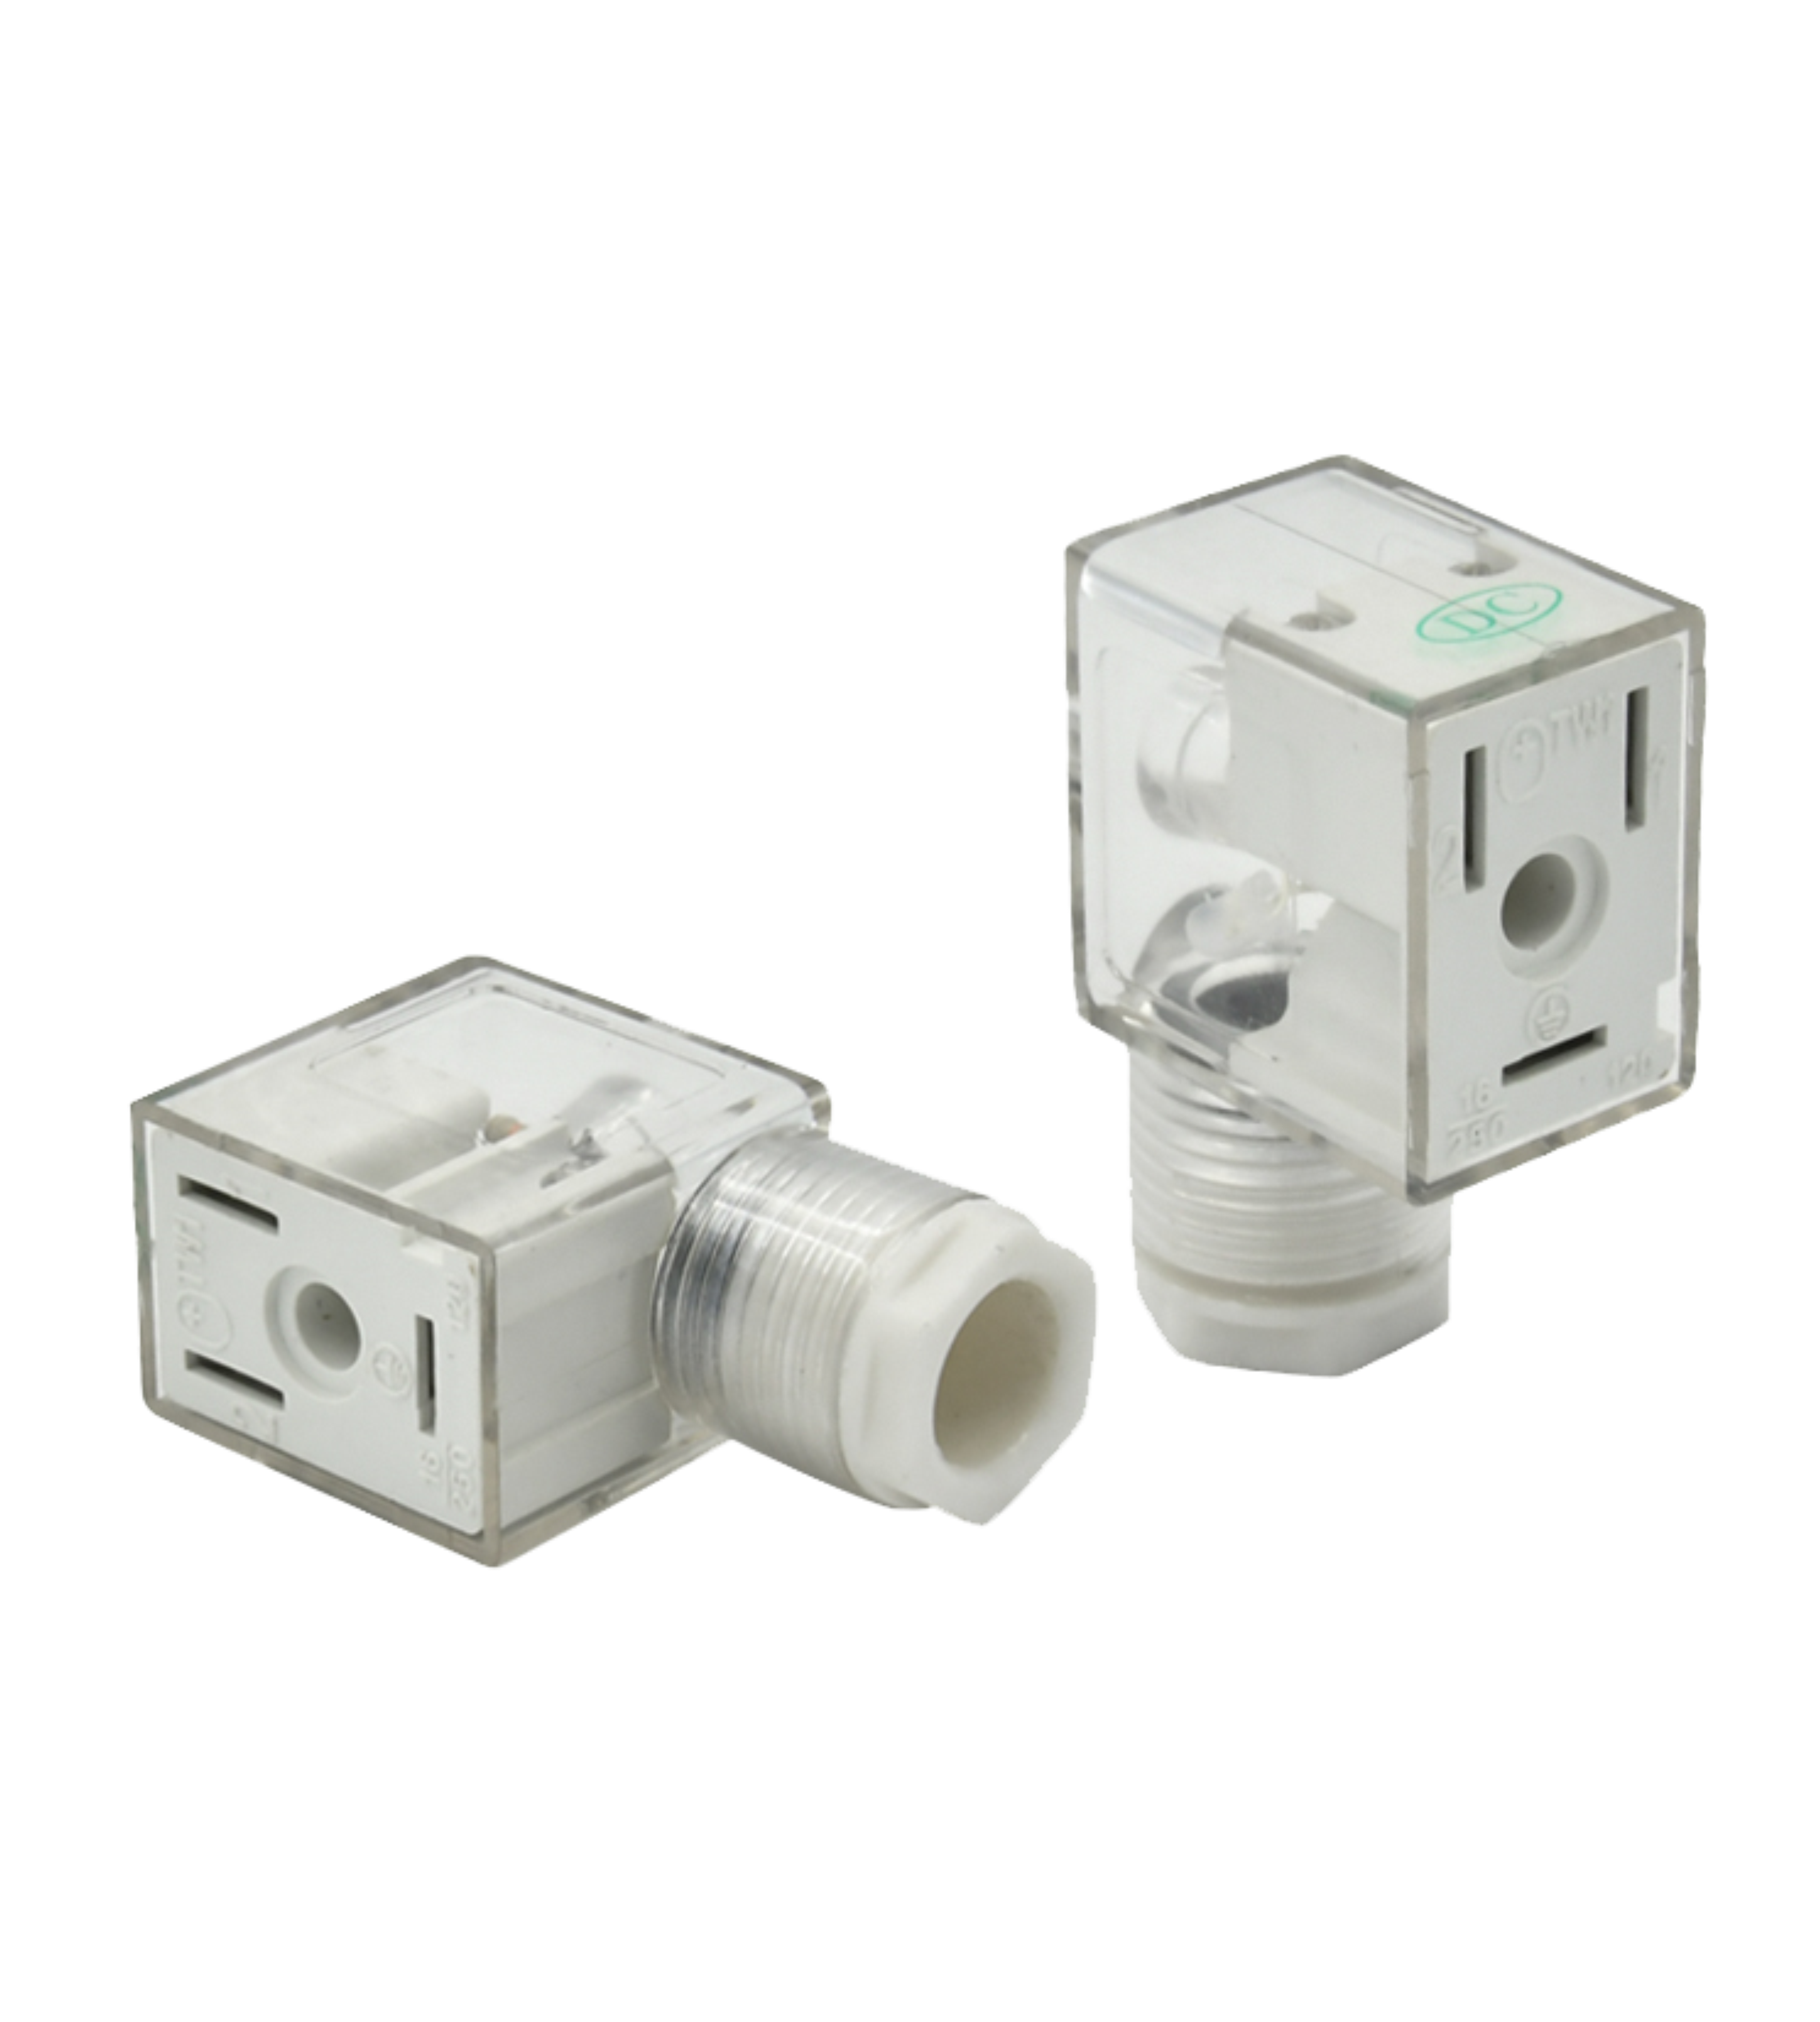 Solenoid Valve Connector Solutions from Rigoal: Ensuring Reliable Performance